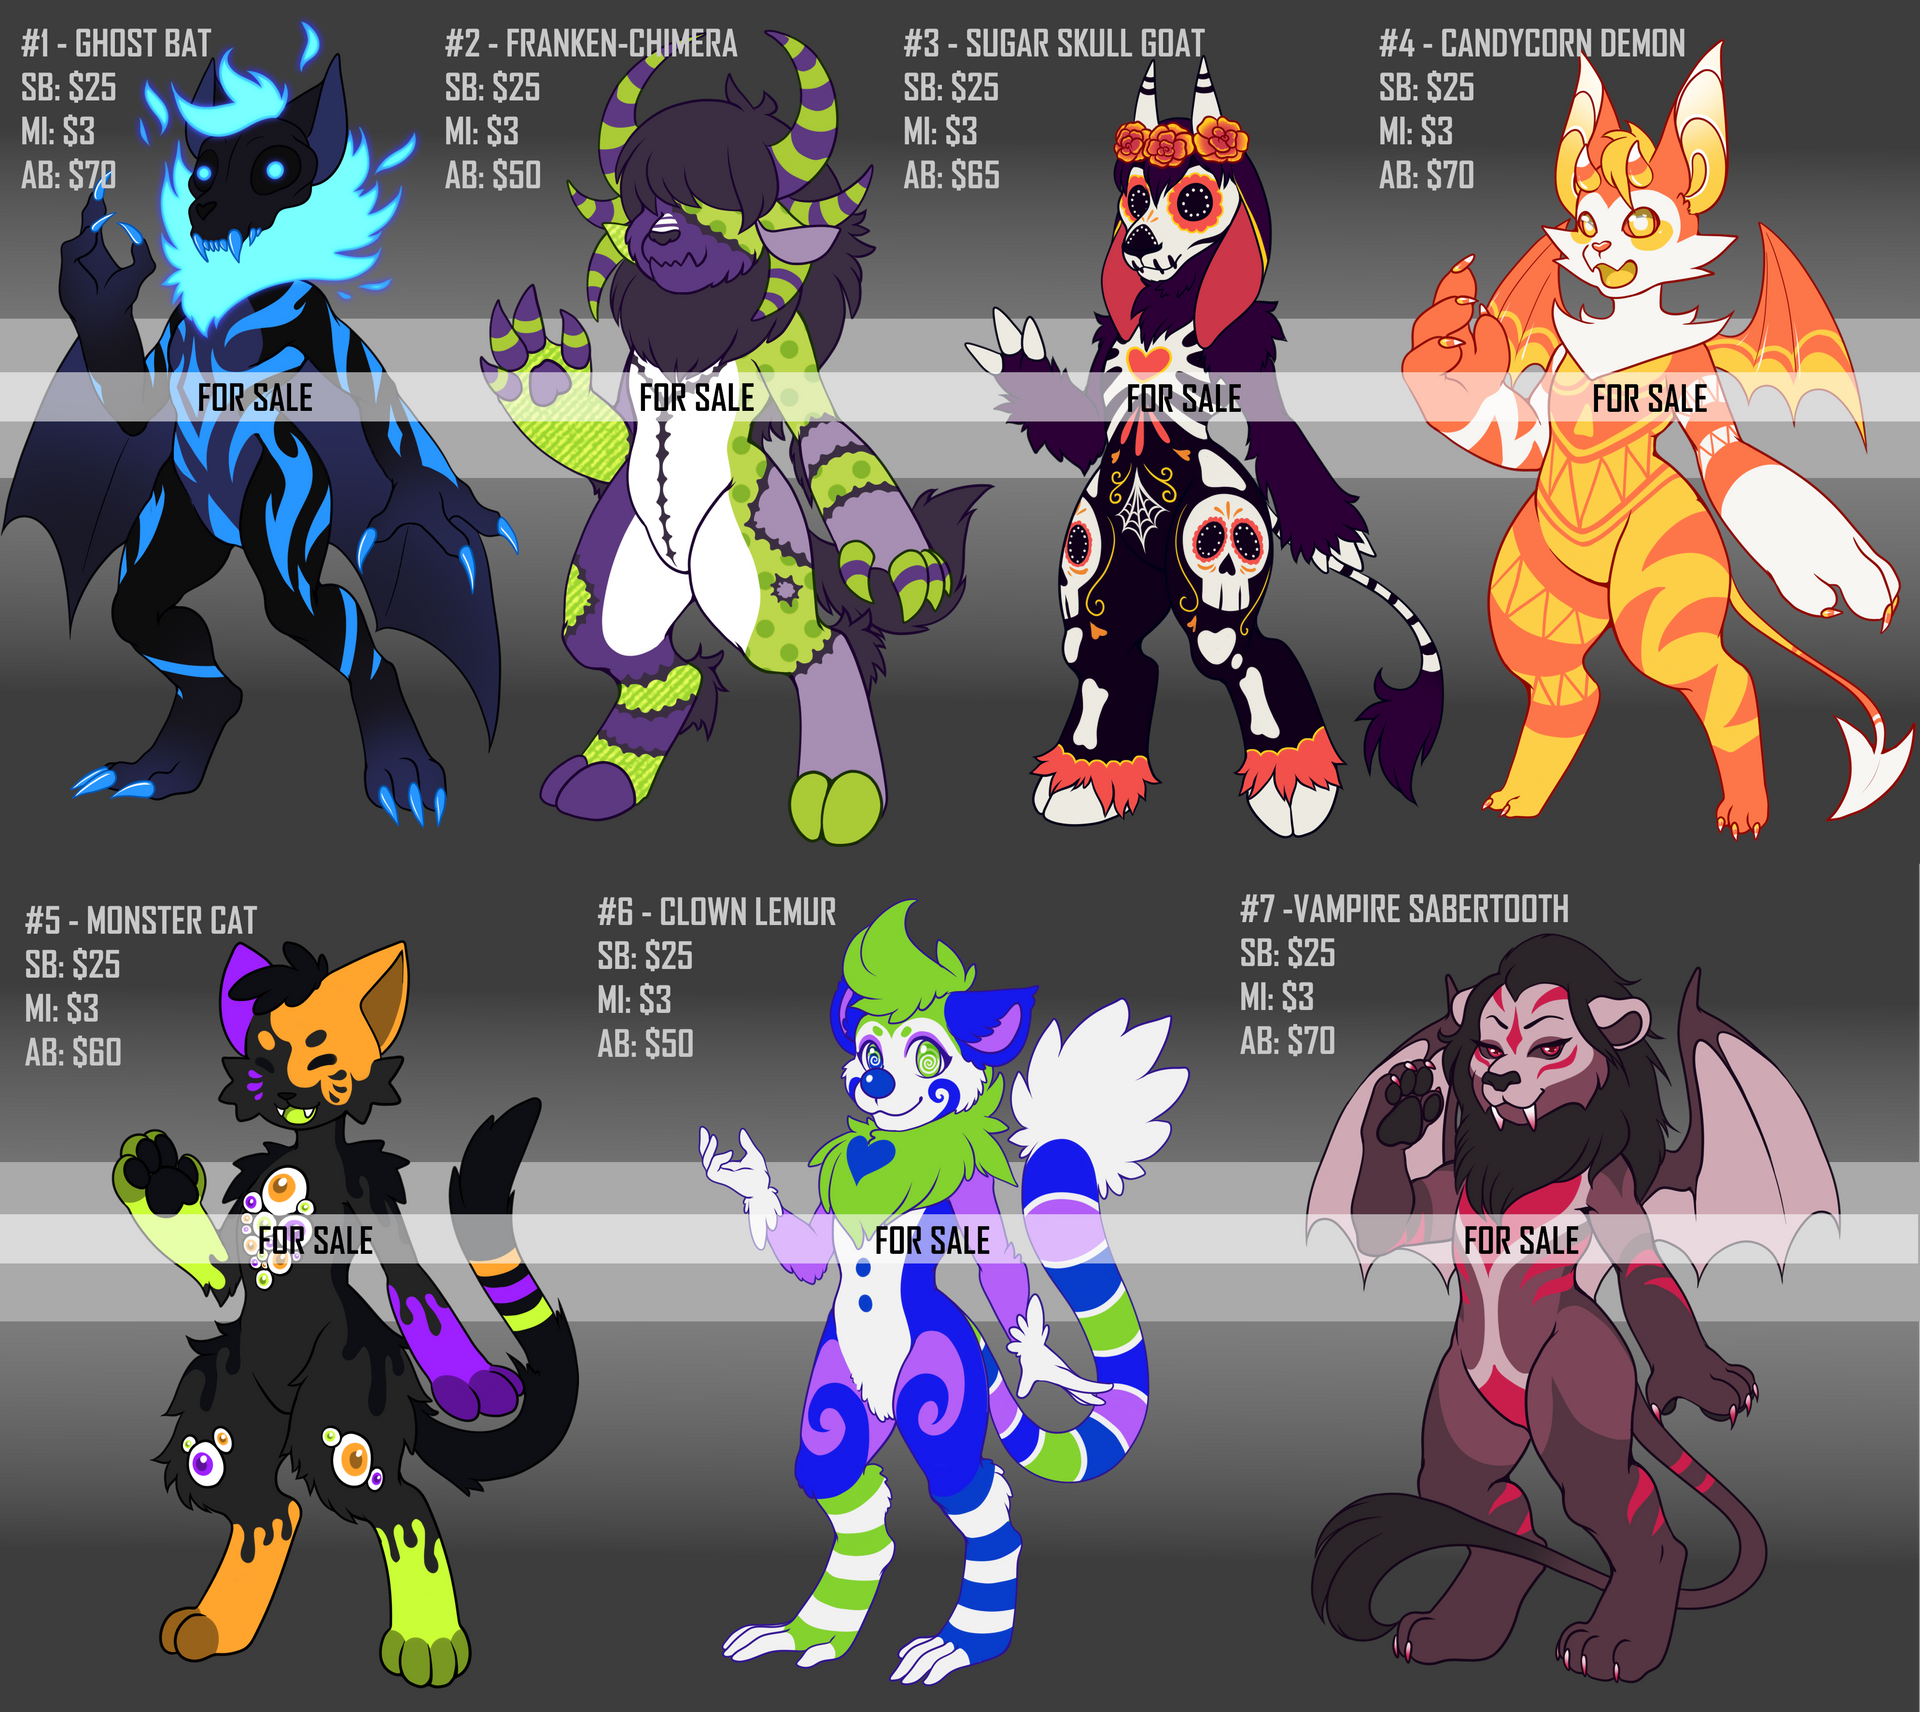 _open___7_left__7_halloween_adoptables_auction_by_therabbitfollower_des8qjh-fullview.png